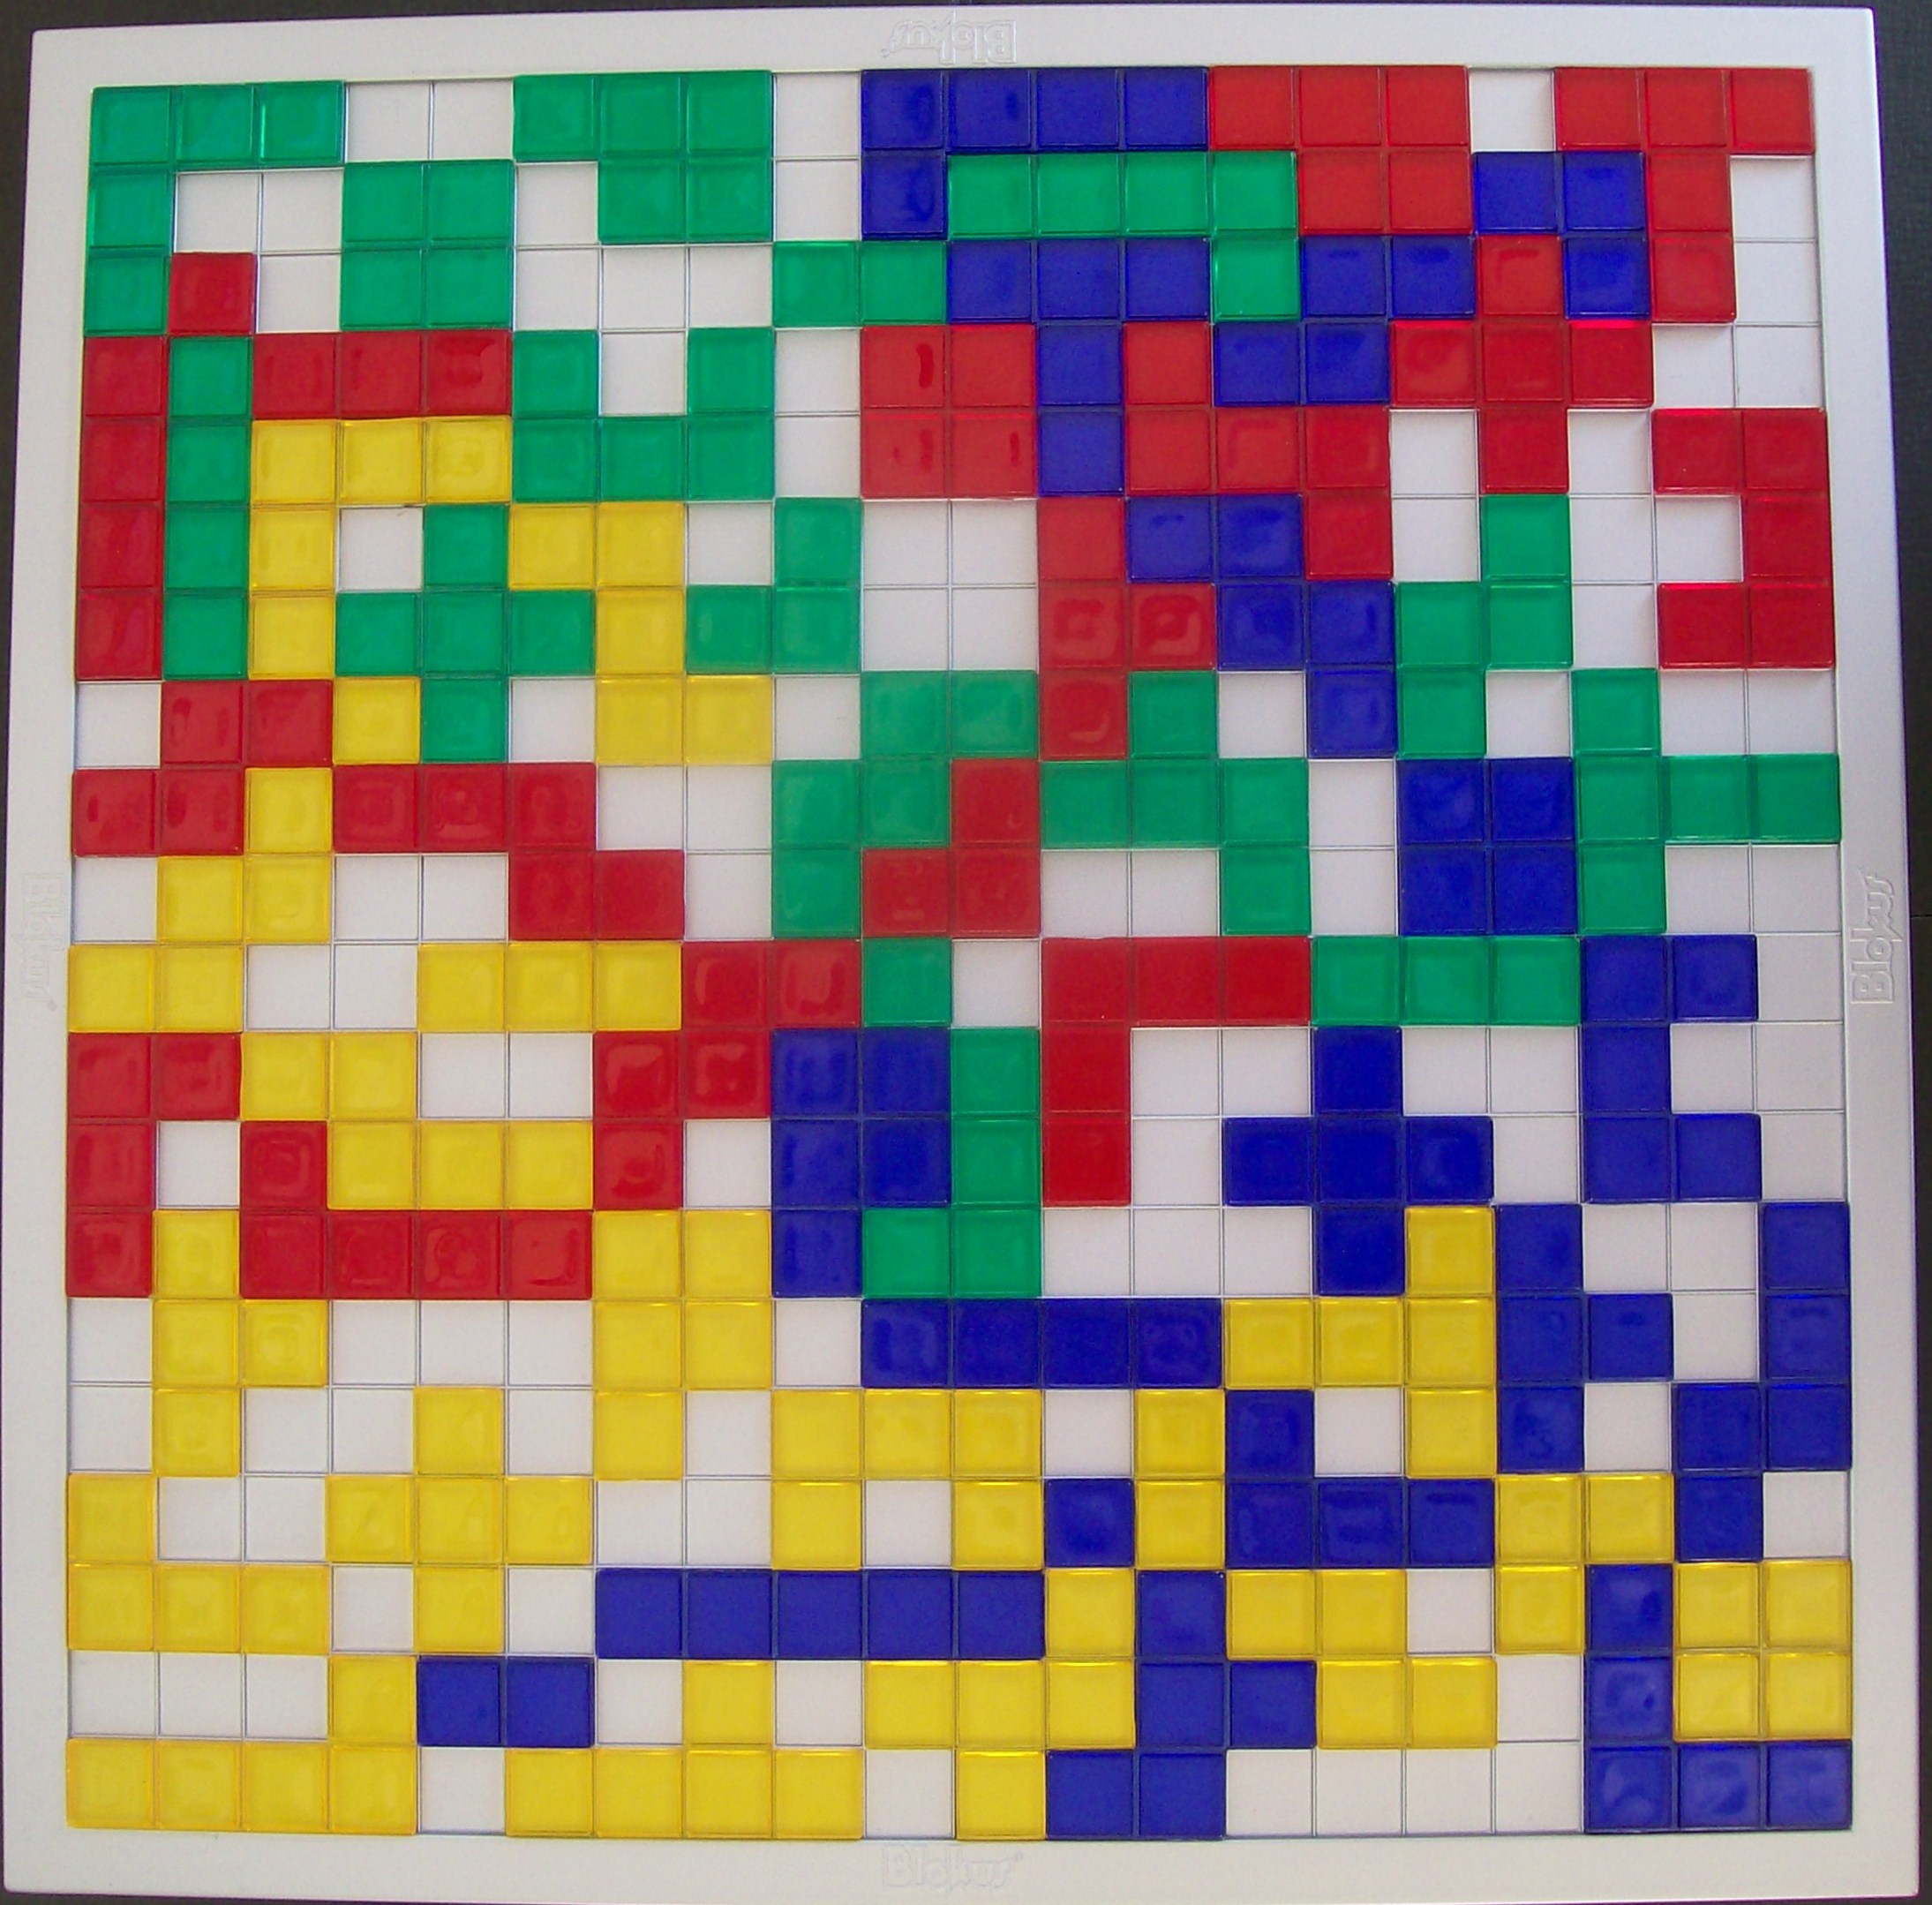 Blokus: Award Winning Game and Great for Family Game Night